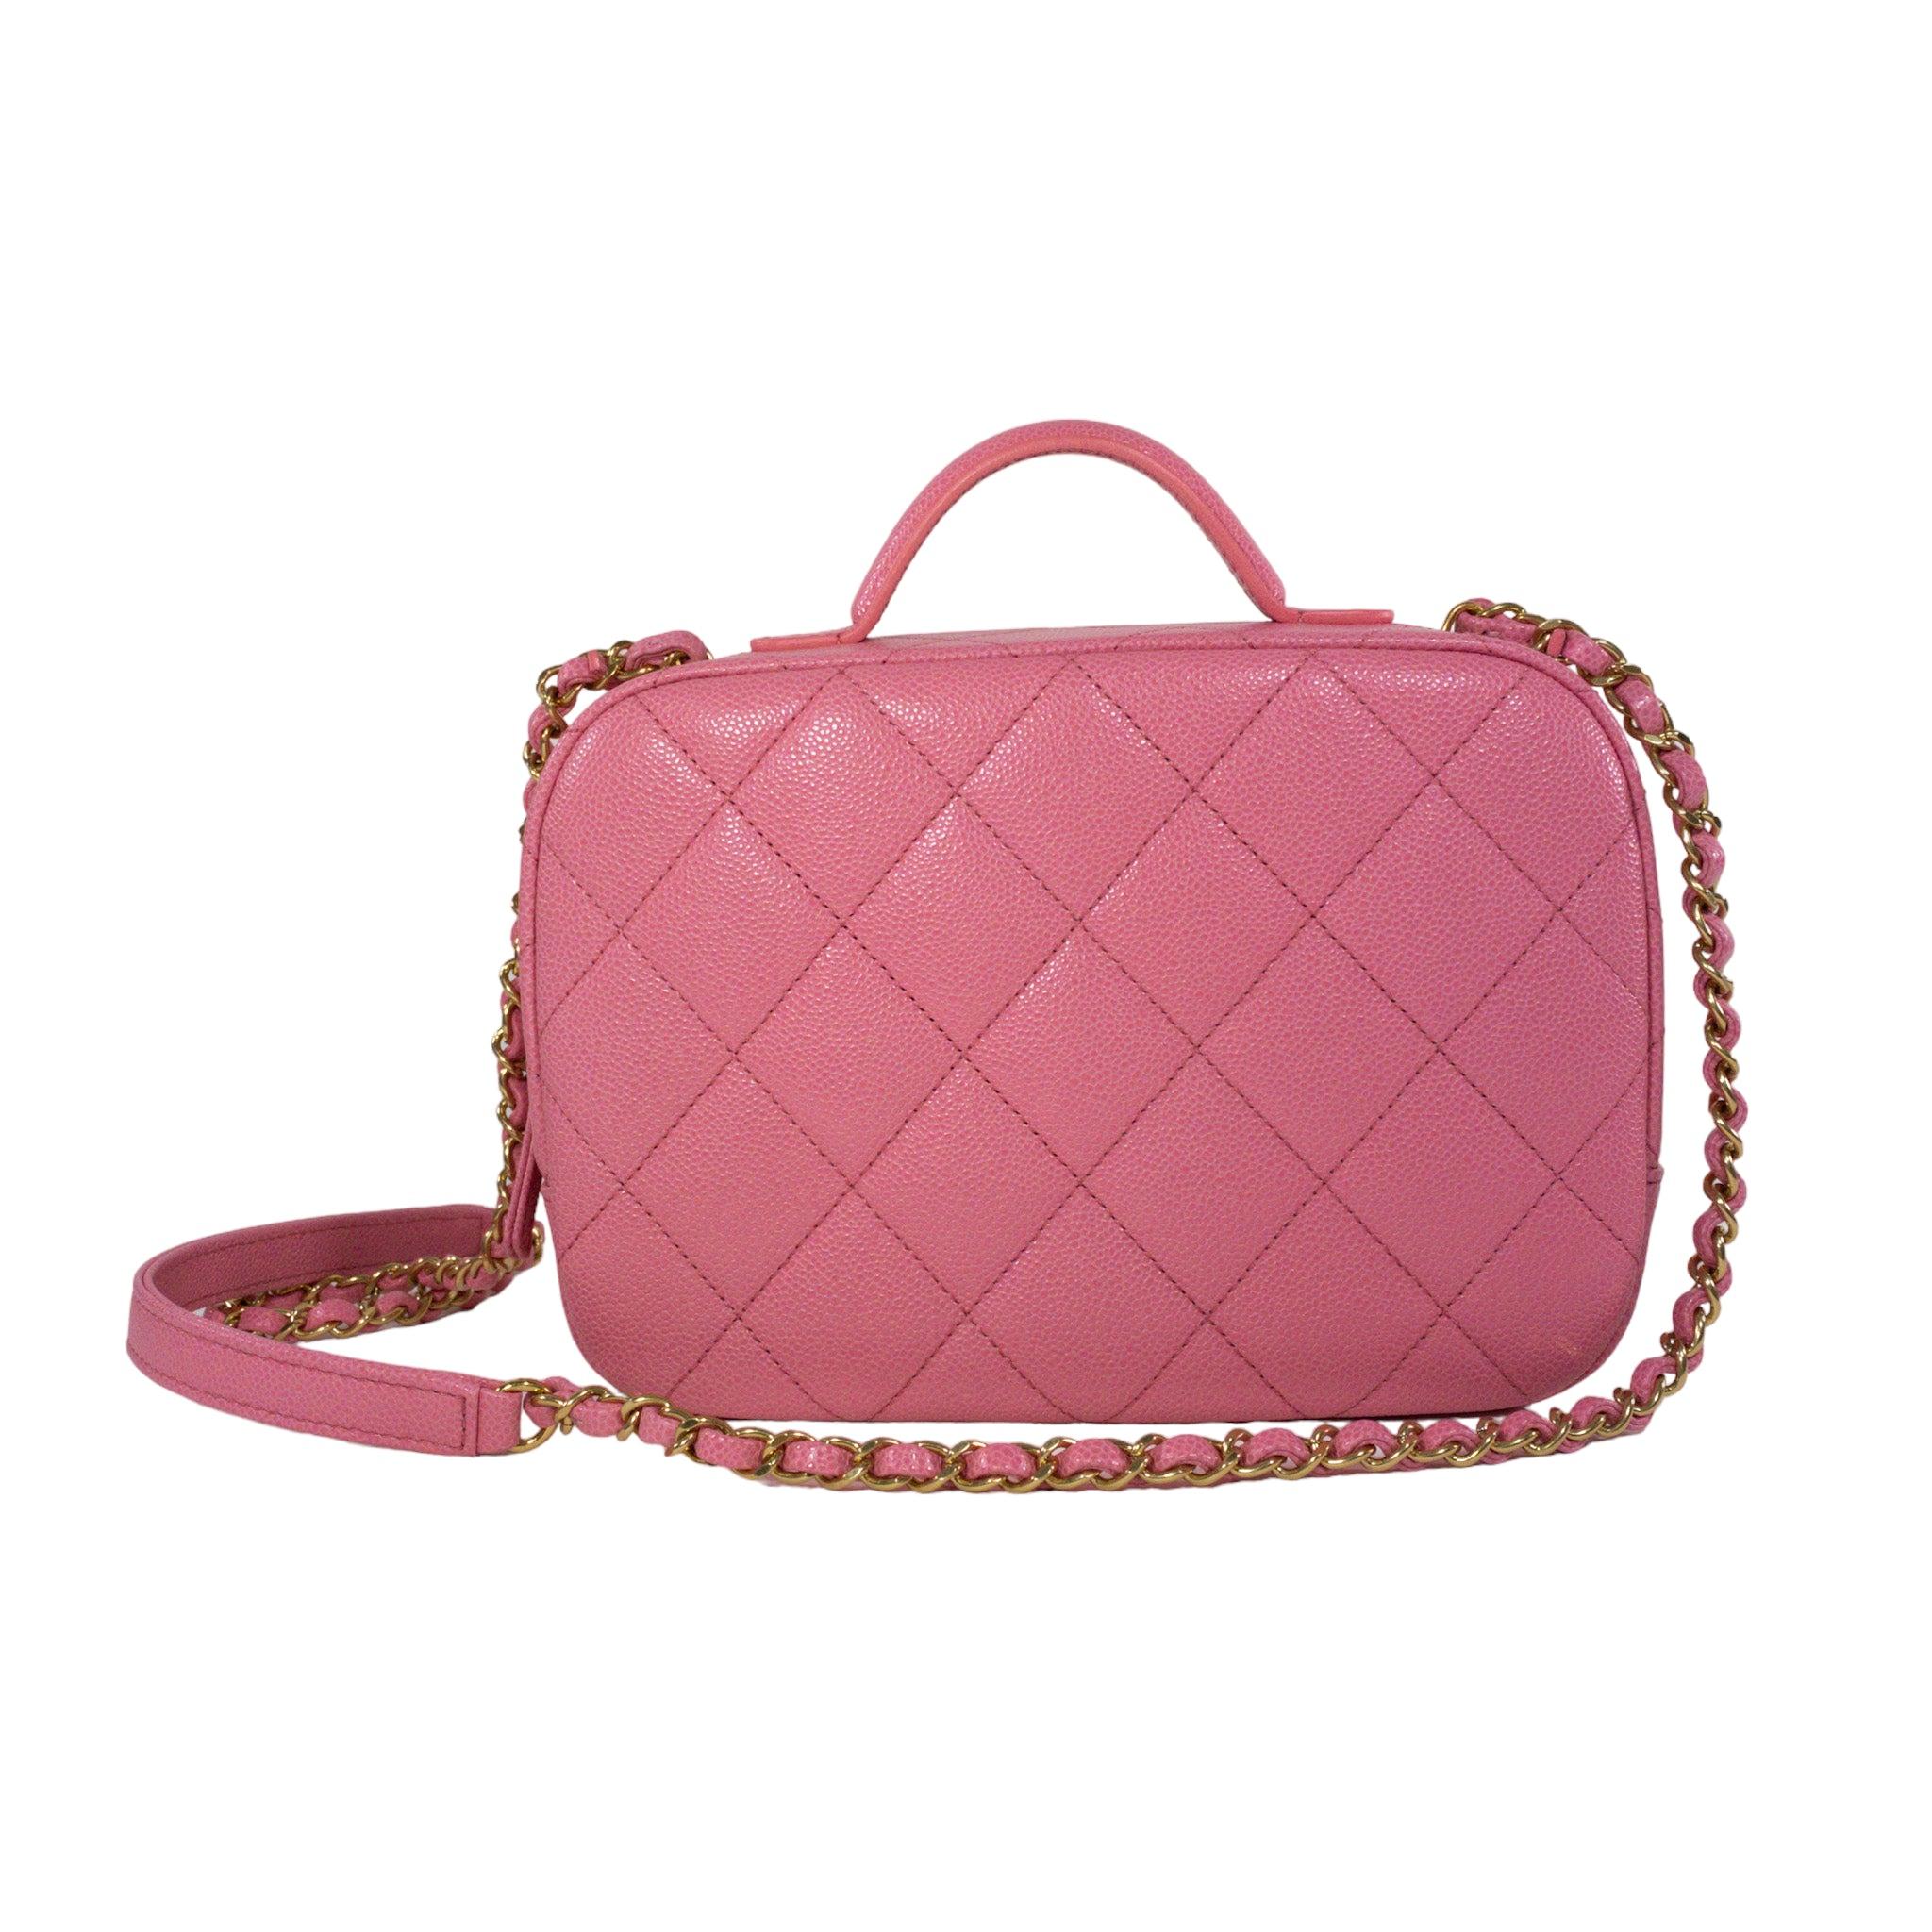 Chanel Pink Caviar Vanity Case Bag

This is an authentic Chanel Vanity Case in pink caviar leather. Quilted throughout, with leather CC logo detail on front. Zips at top, carried by top handle or chain strap. Lined in fabric 

Additional